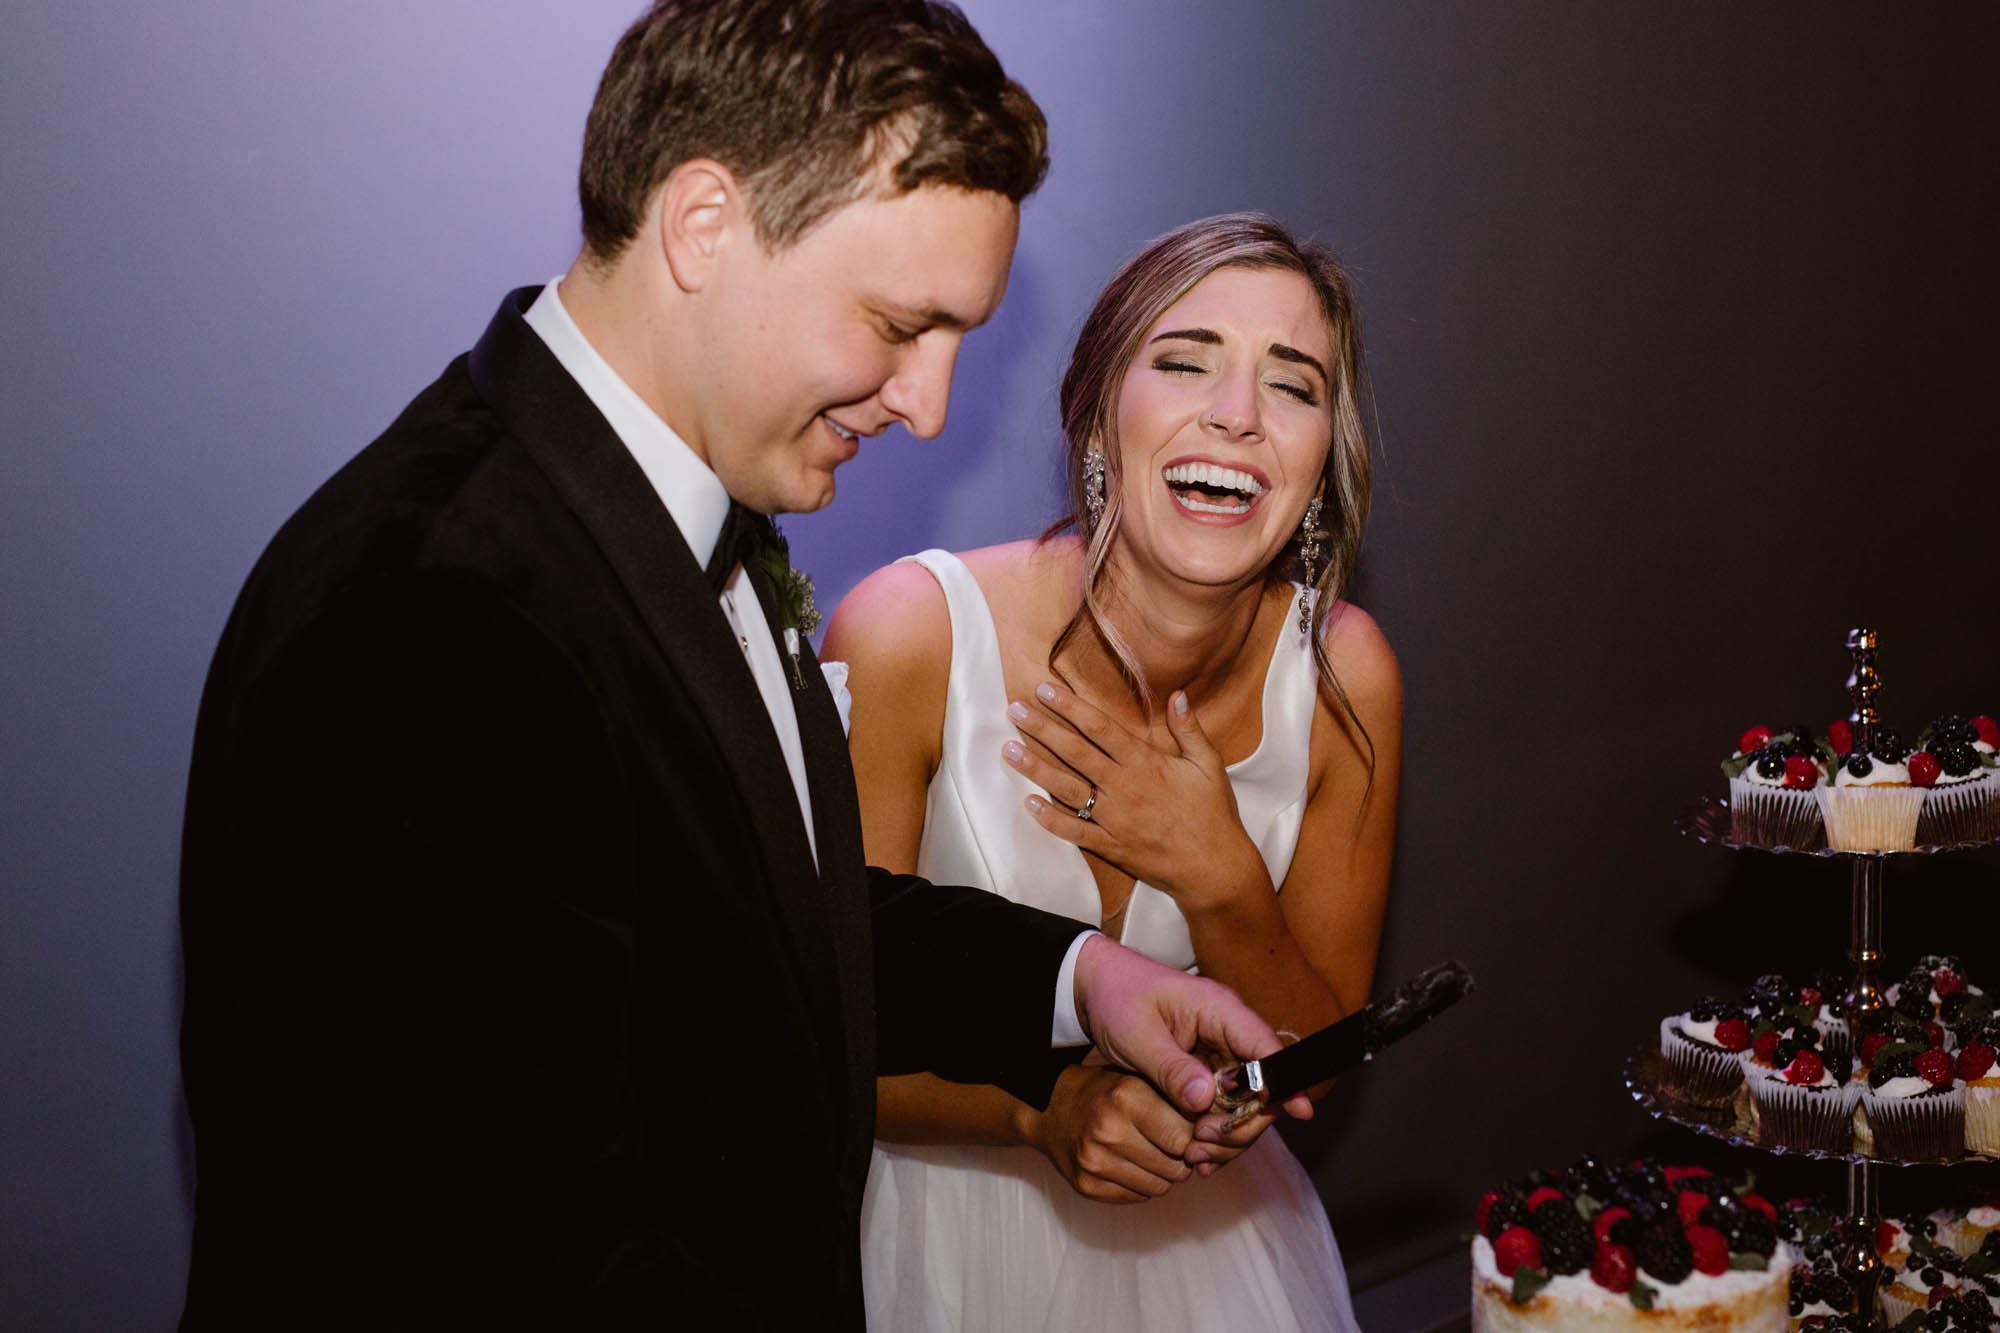 Everything Your Knoxville Wedding DJ Wants You To Know